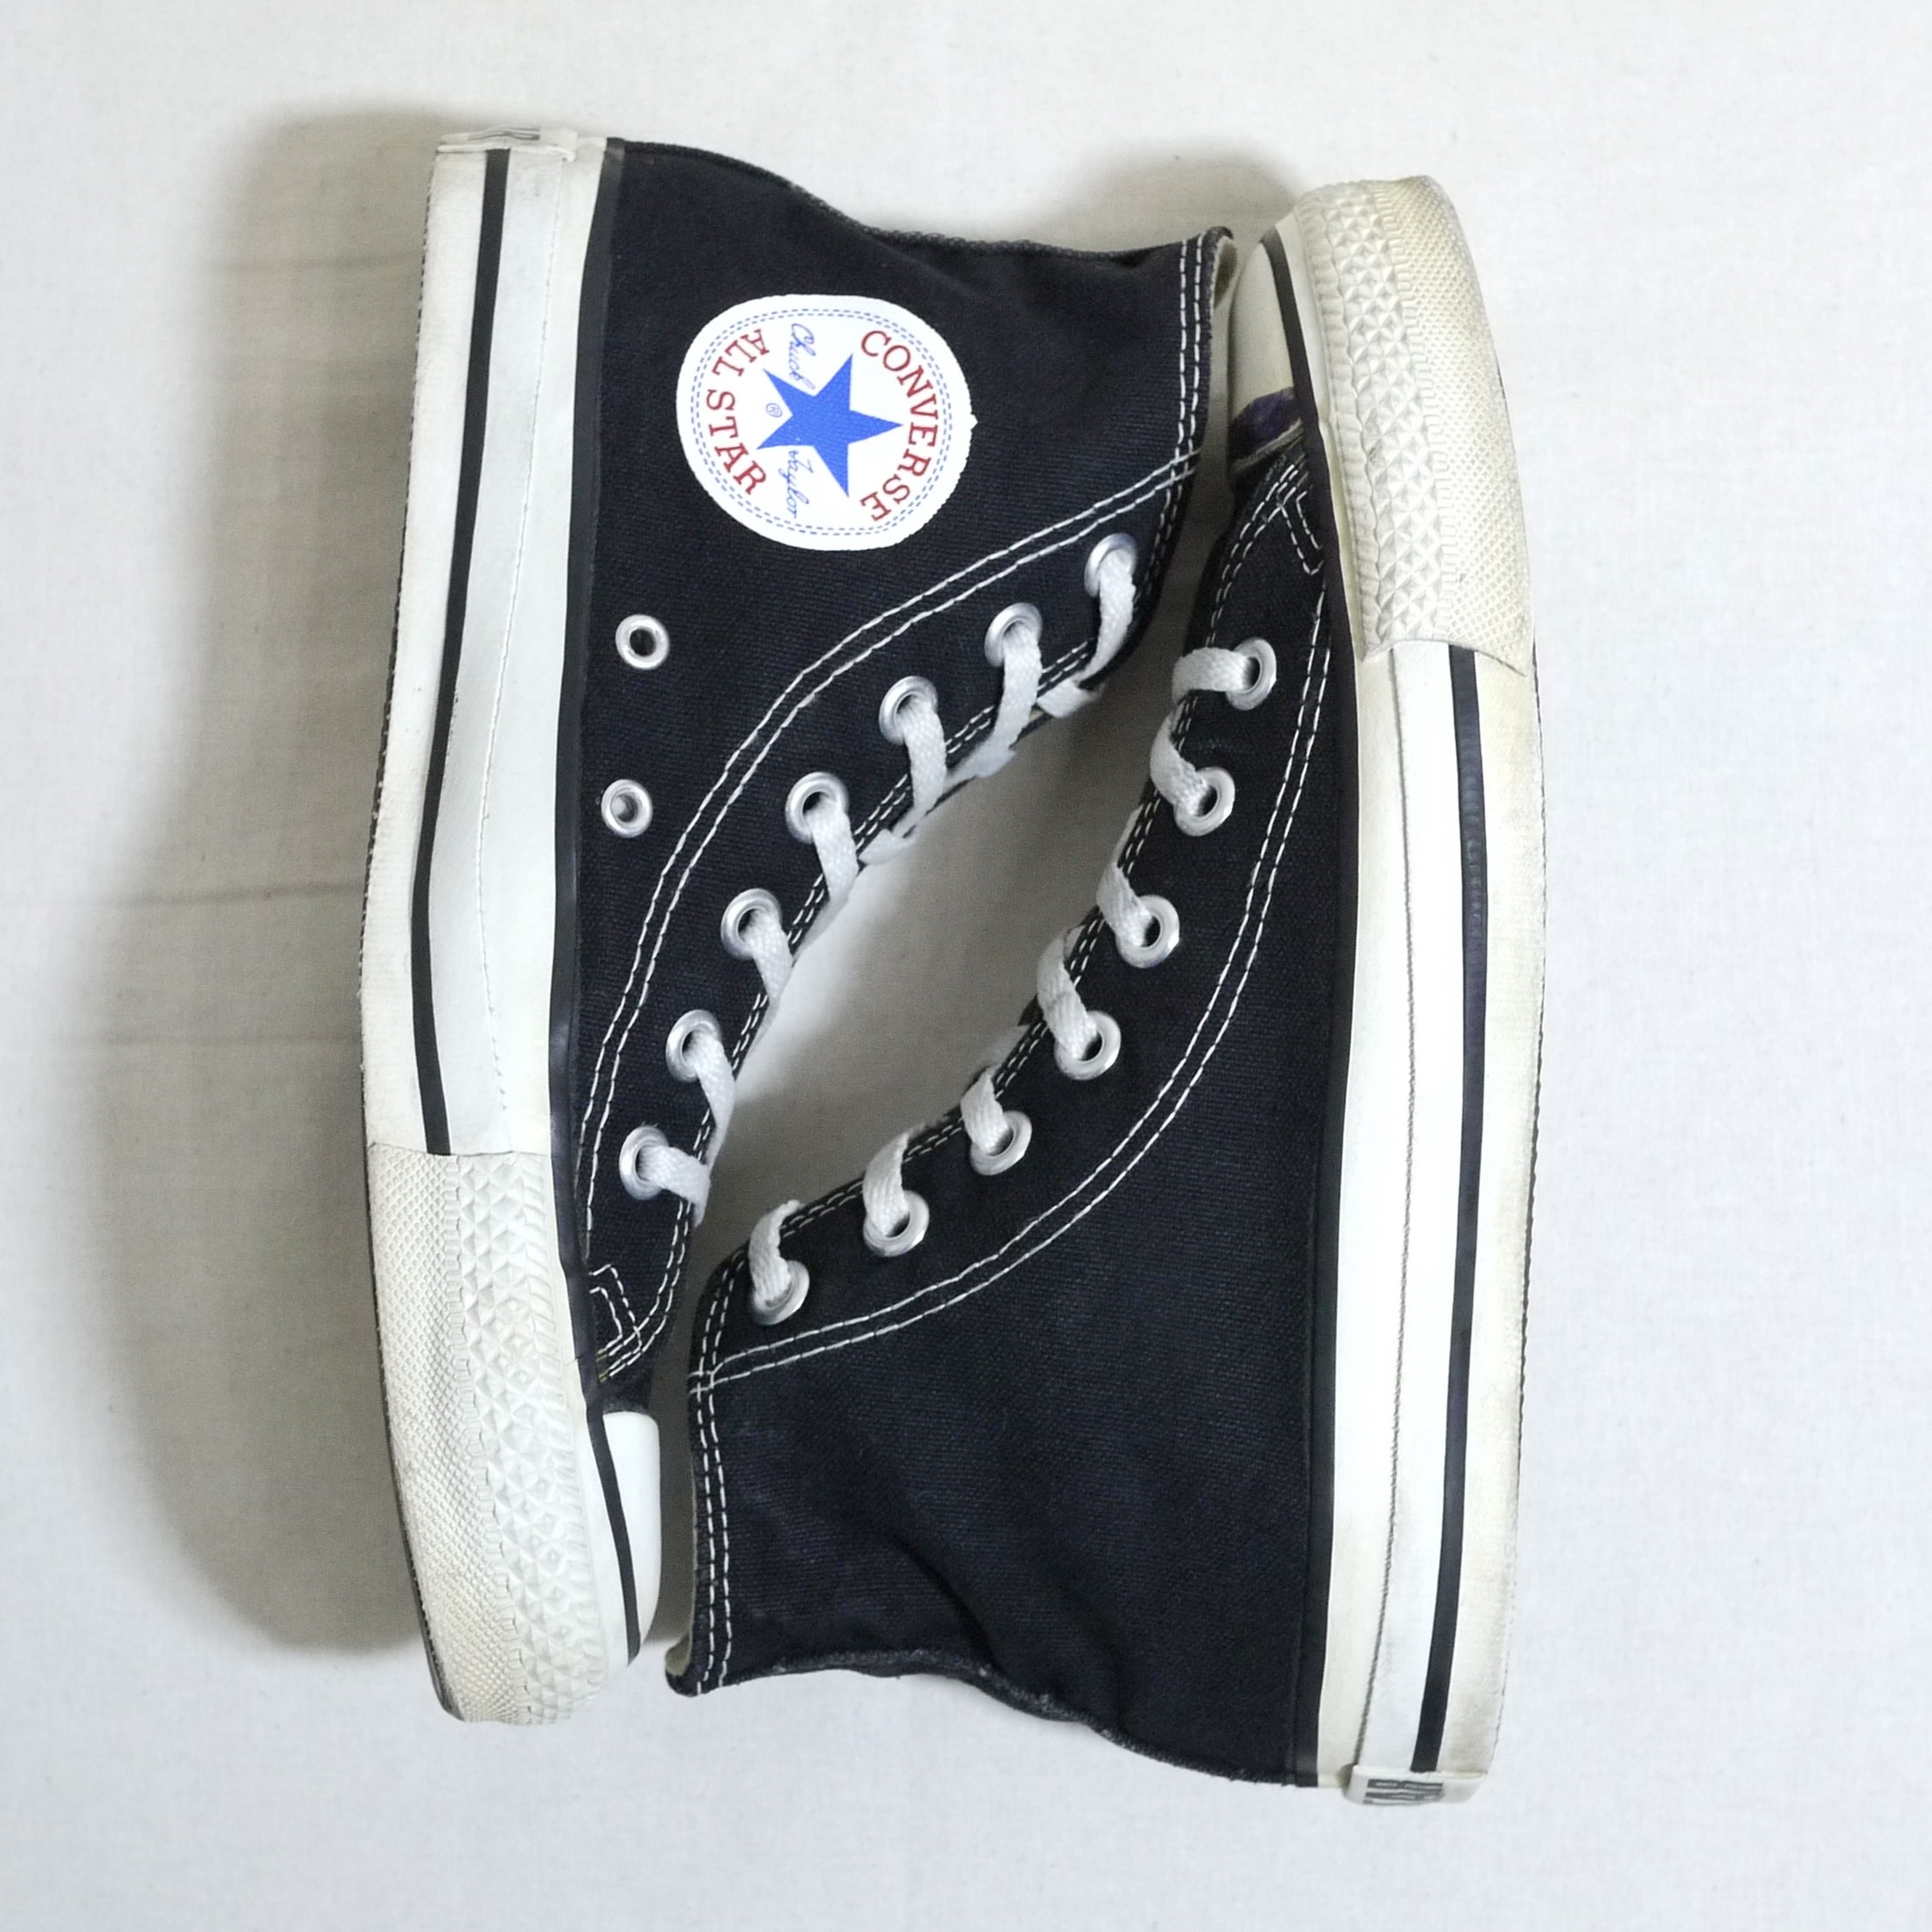 CONVERSE 1990's ALL STAR Size4 1/2 